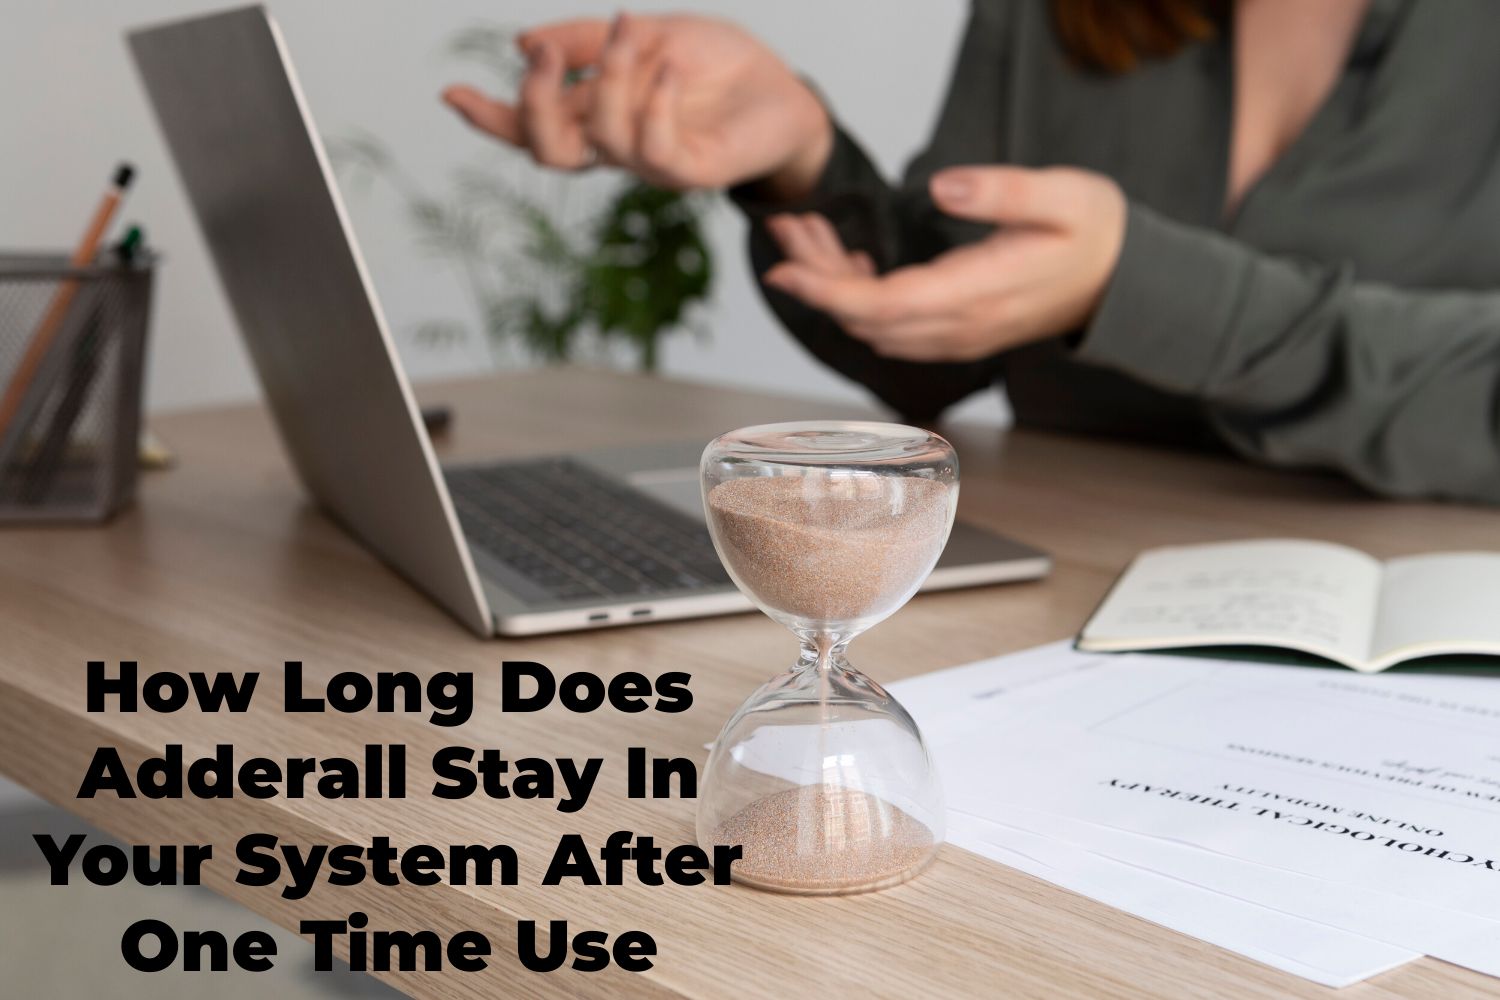 How Long Does Adderall Stay In Your System After One Time Use